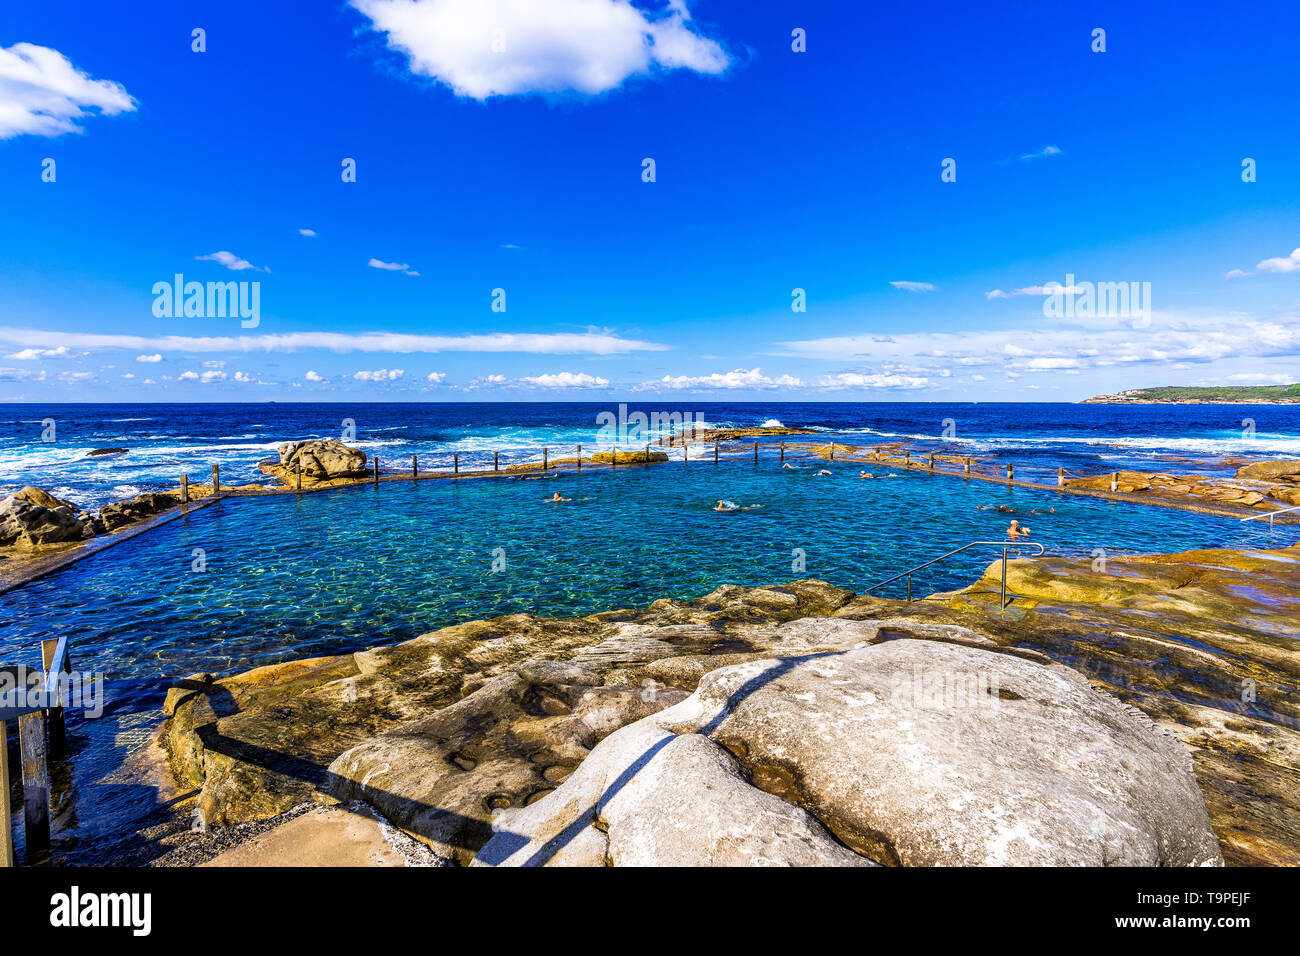 Swimmers in the rock pool, north of Maroubra Beach in Sydney, Australia Stock Photo